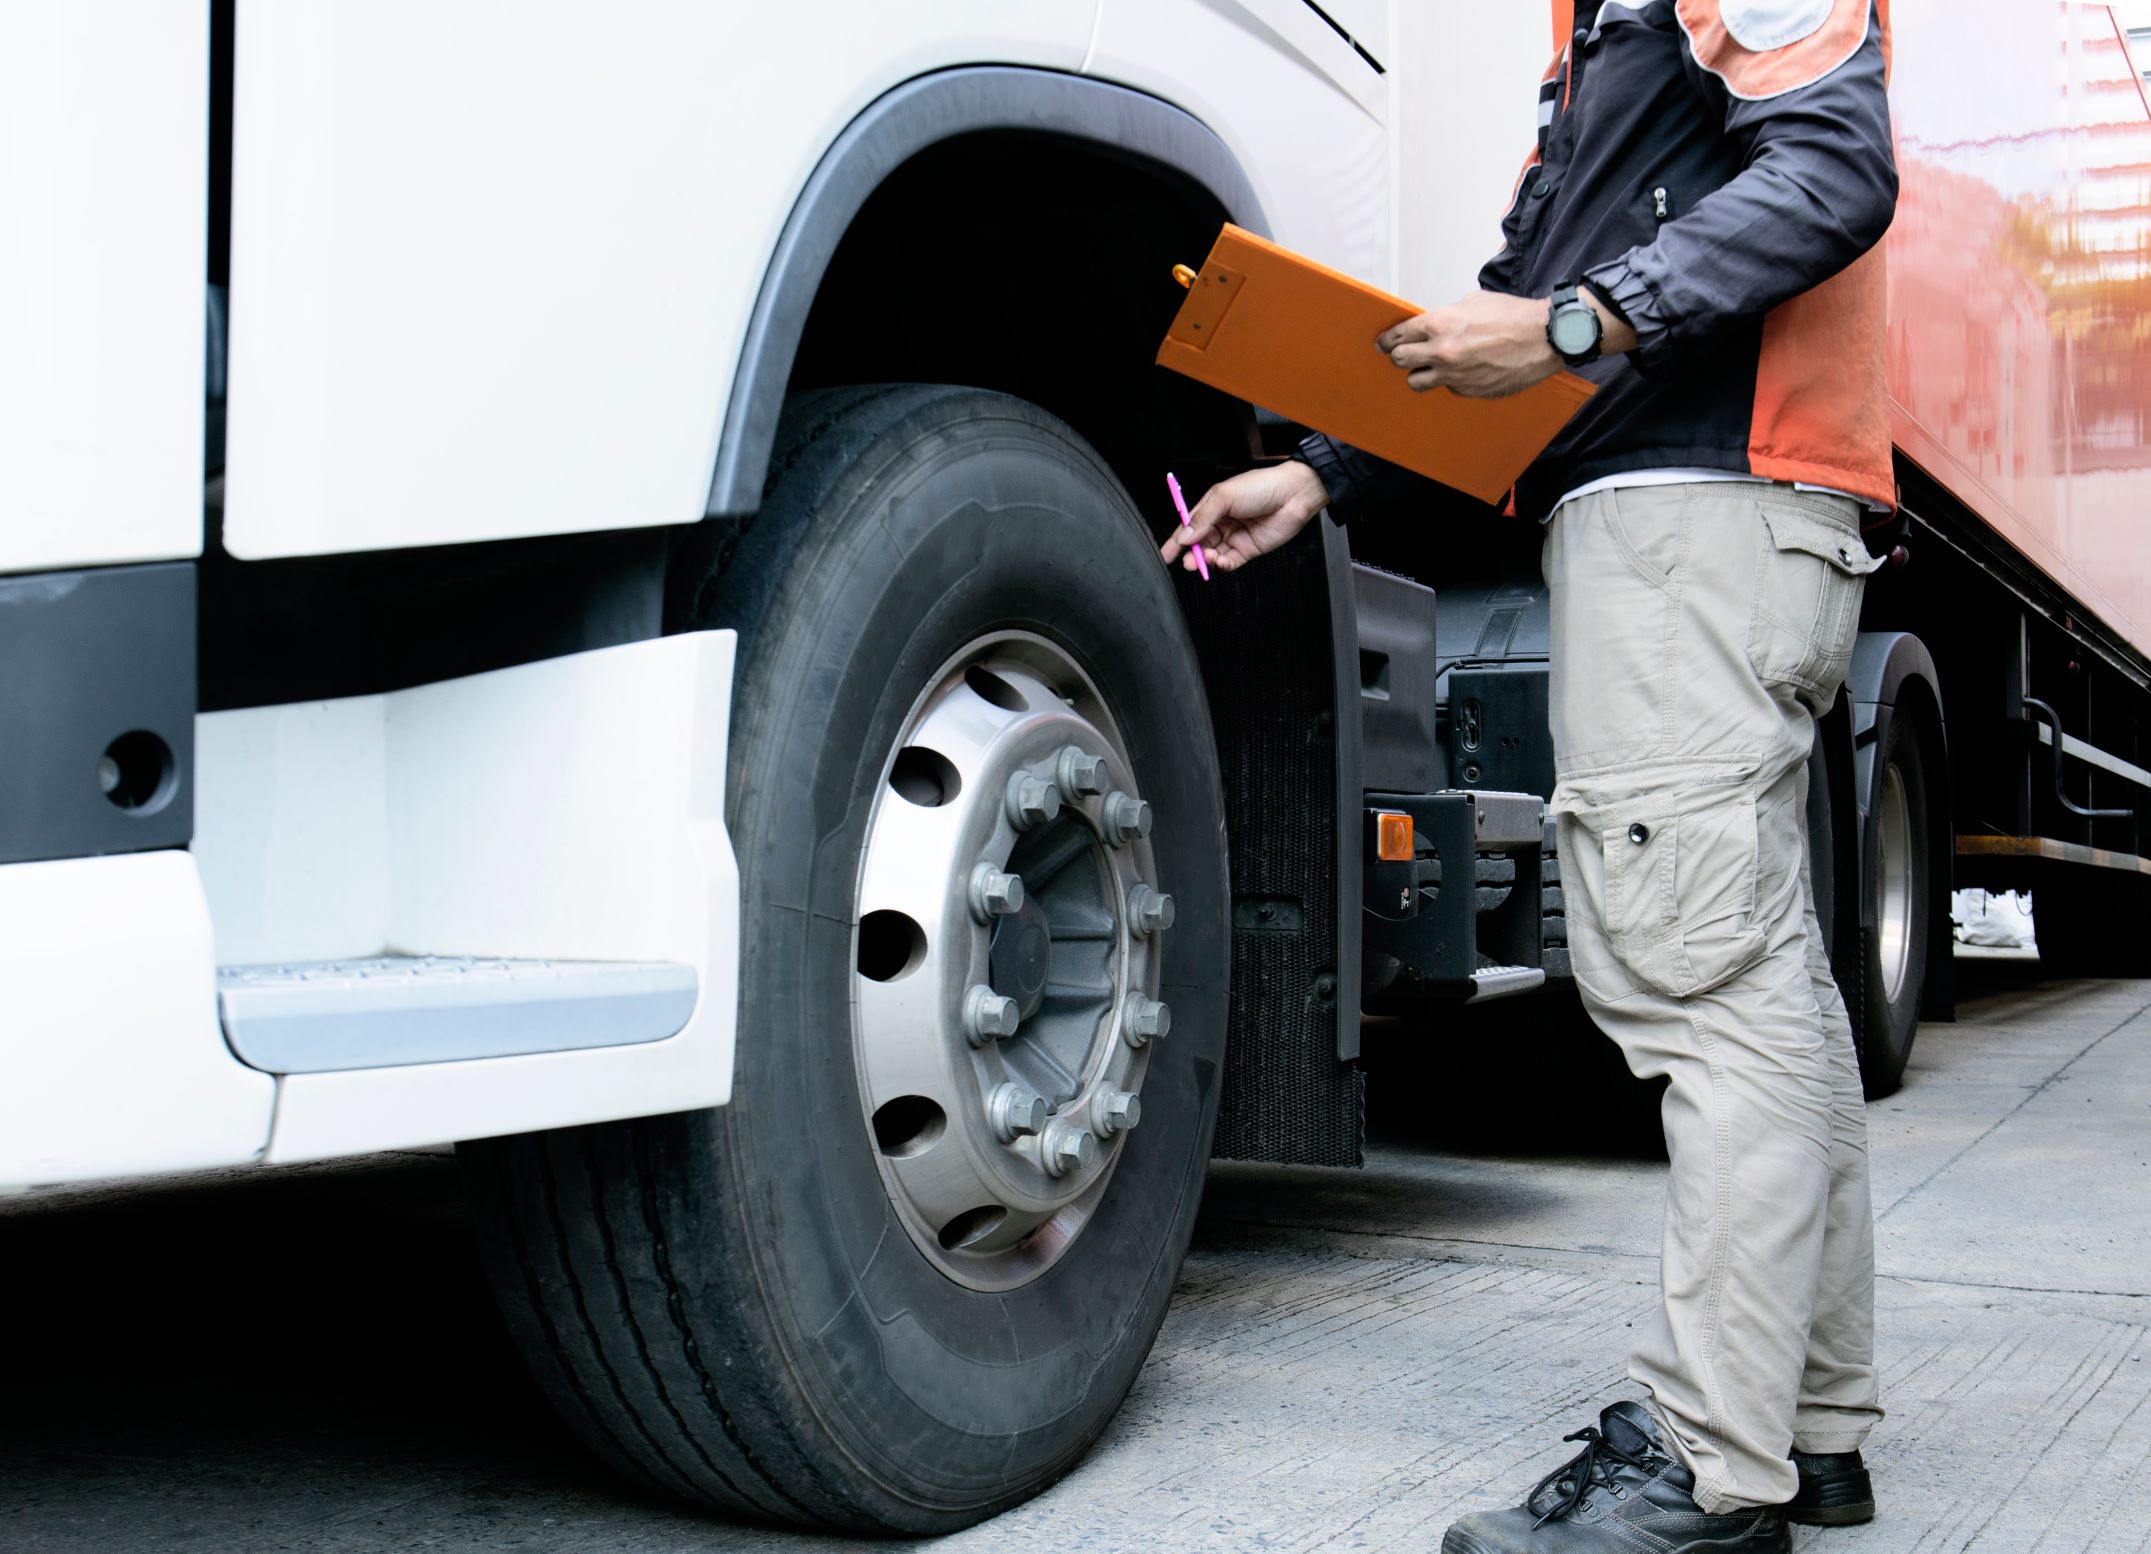 Inspector conducting a check in an orange vest inspecting tires